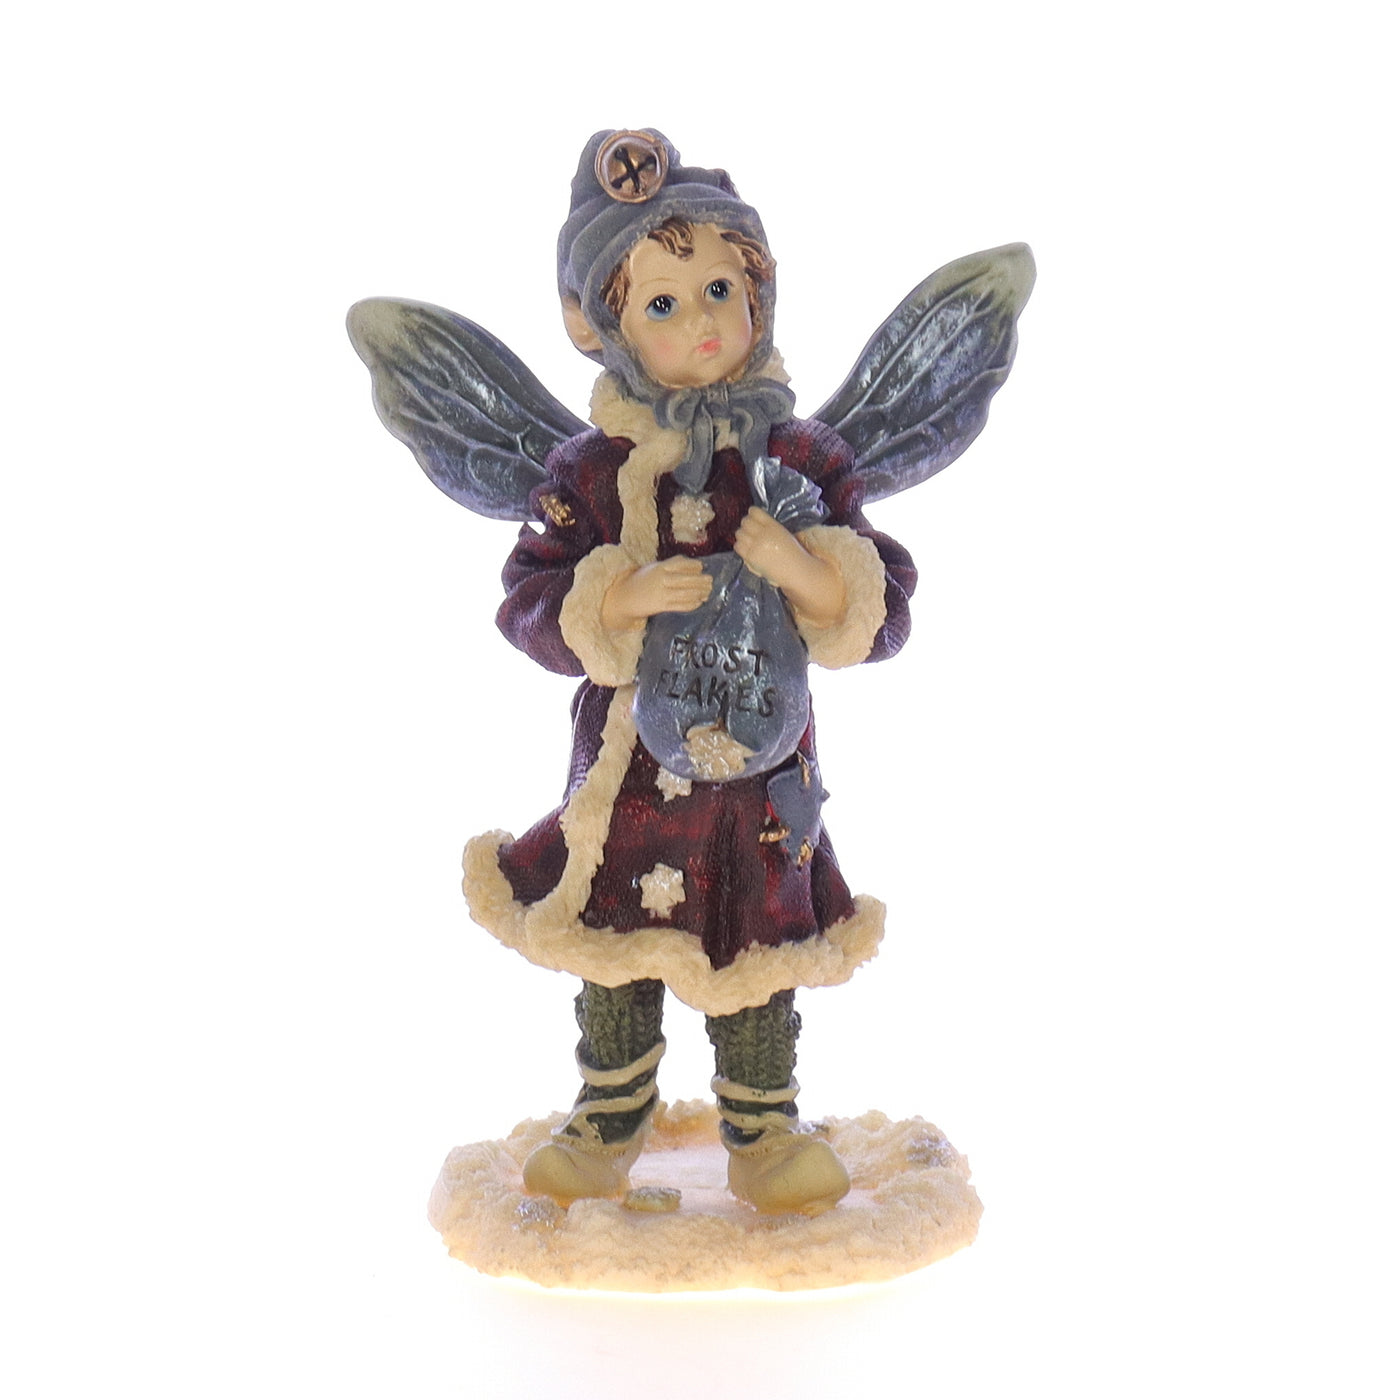 The_Wee_Folkstone_Collection_36002_Kristabell_Faeriefrost_Christmas_Figurine_1997 Front View